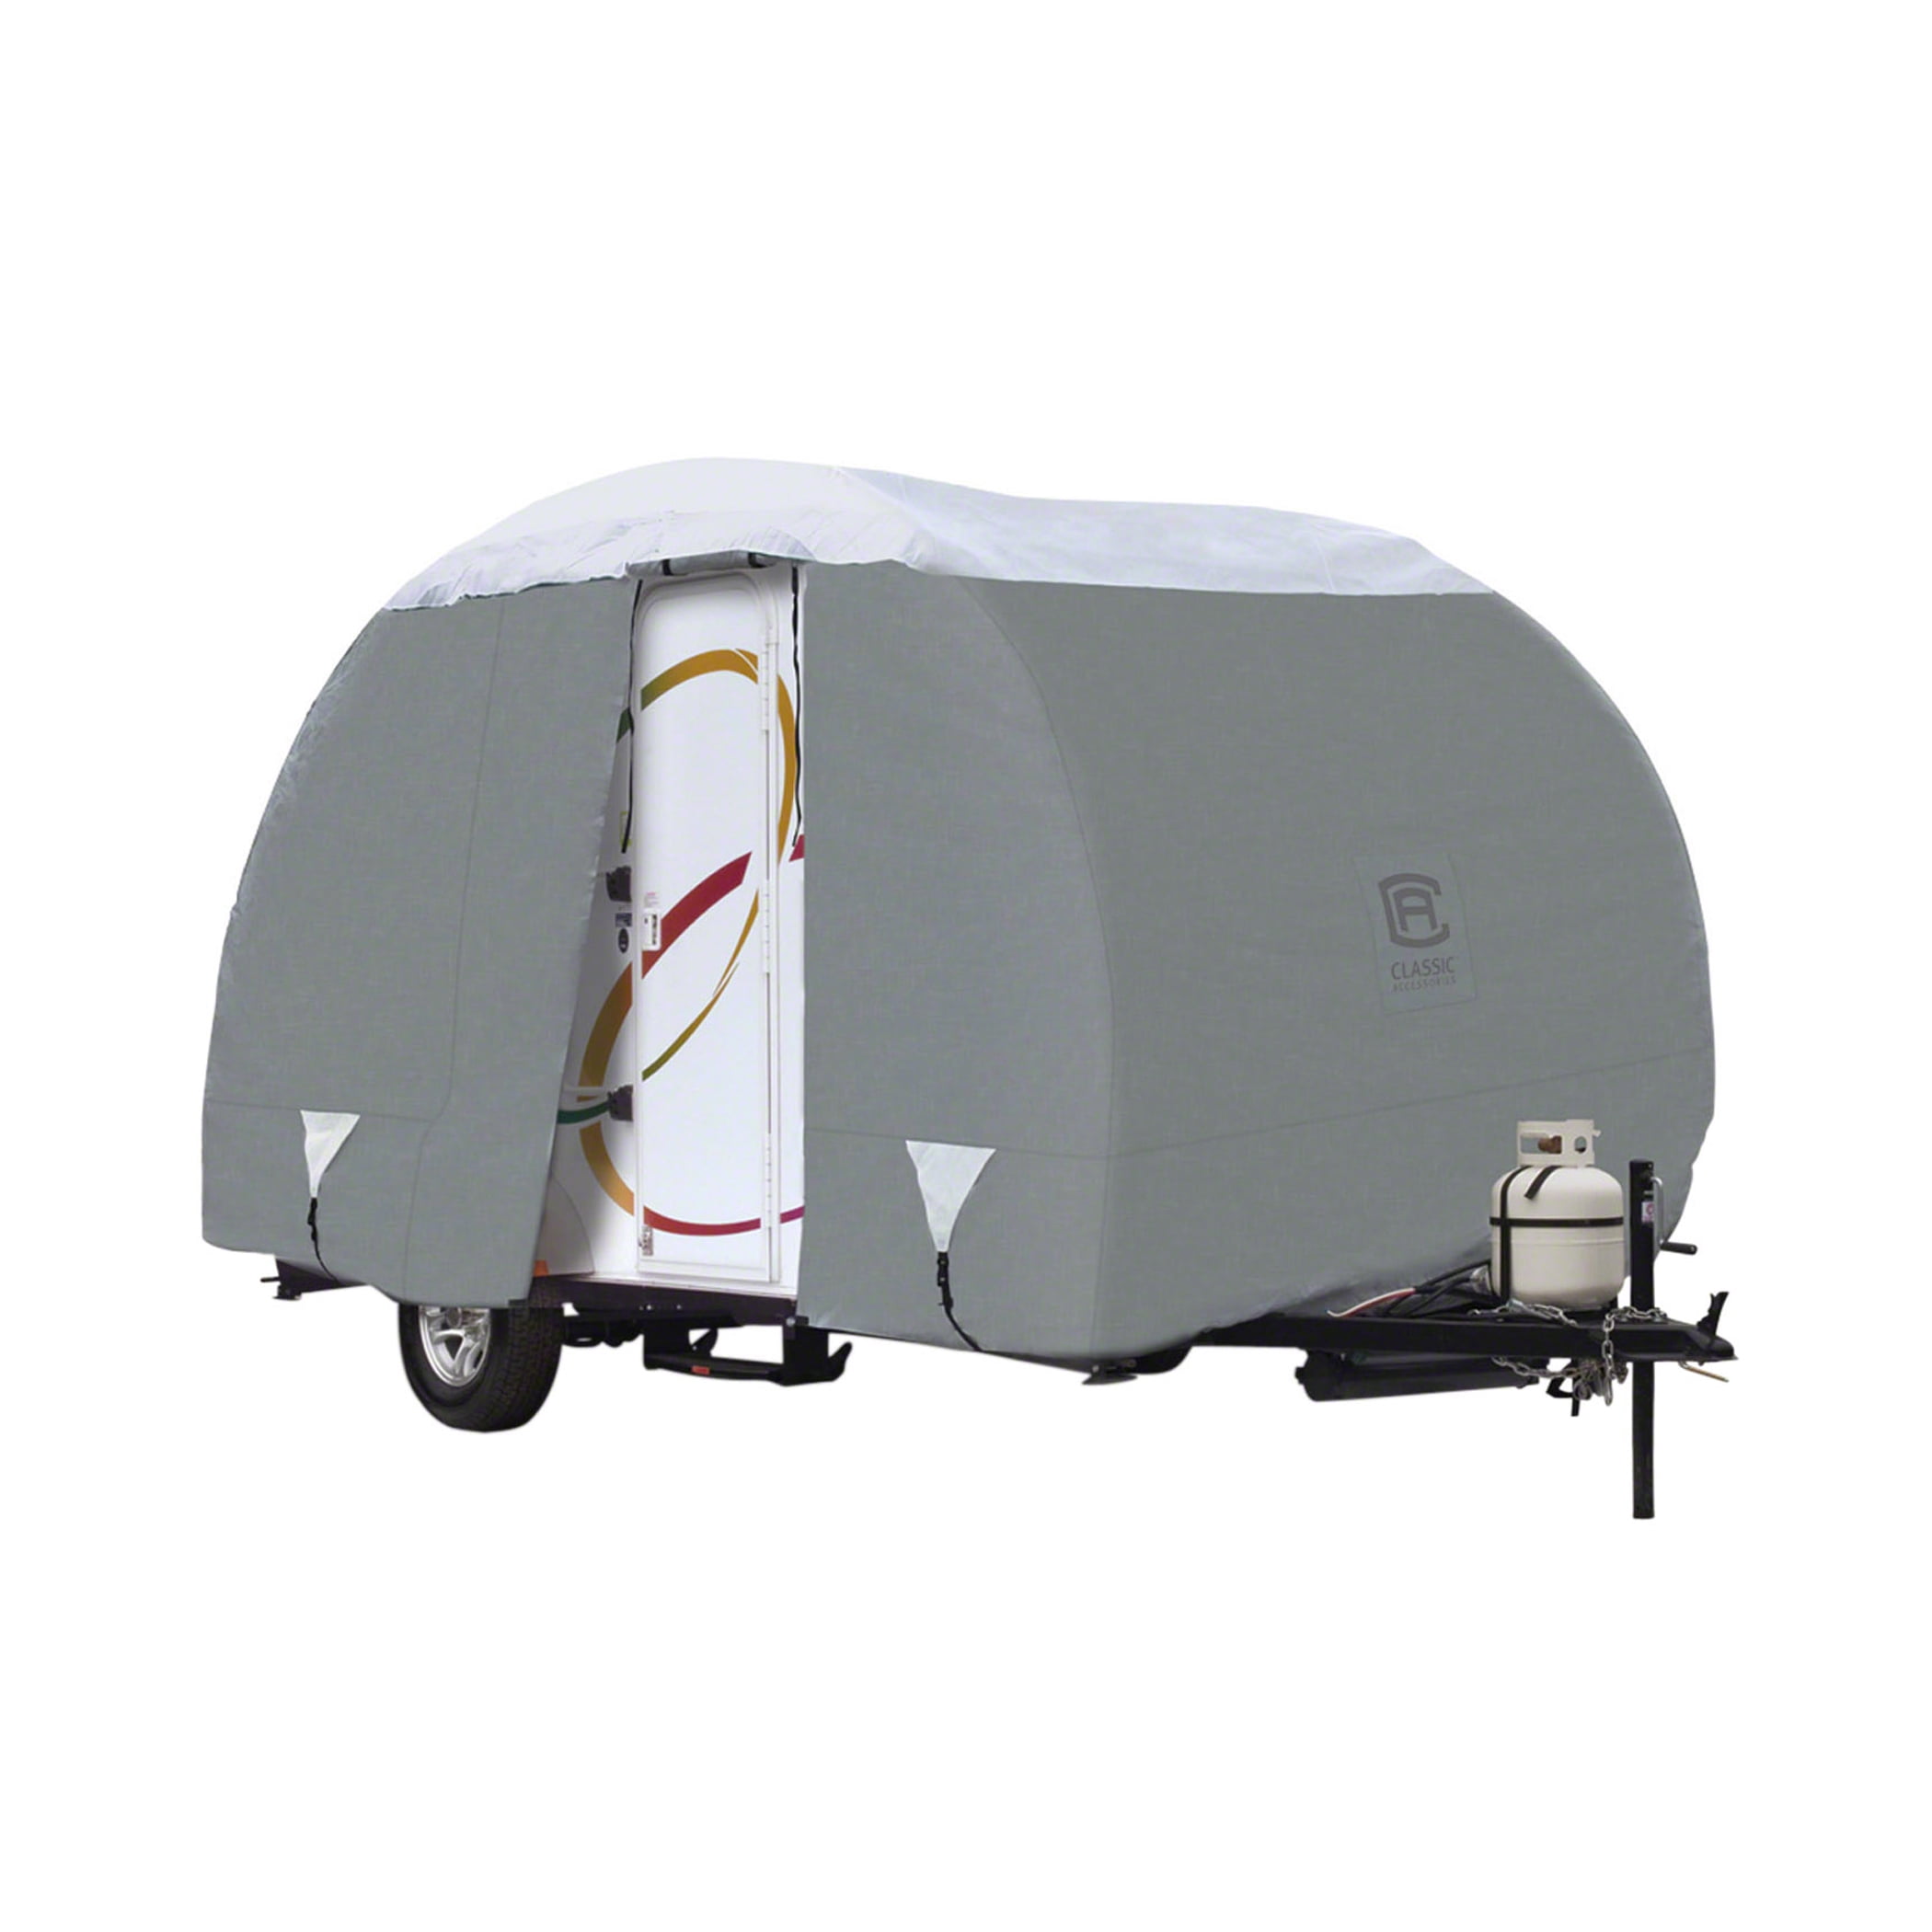 Side Storage Areas Waterproof Durable RV Motorhome Travel Trailer/Toy Hauler Cover Fits Length 20-22 Travel Trailer Camper Zippered Panels Allow Access To The Door Engine and Ramp Door